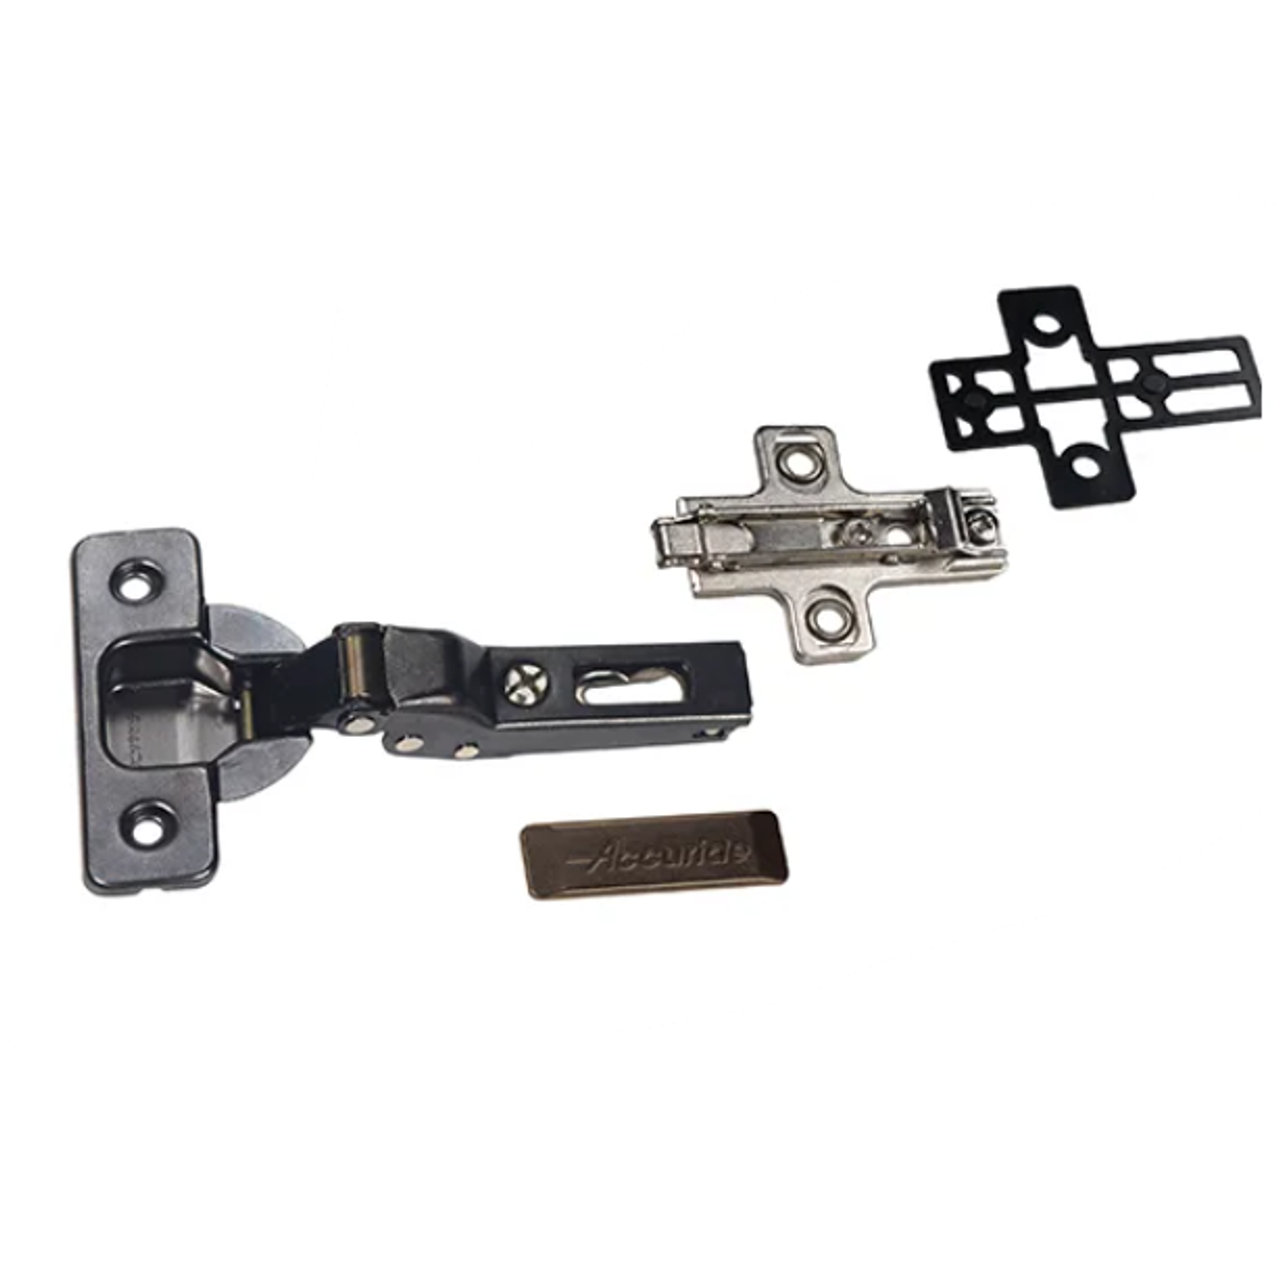 Accuride extra black hinge for the CB1332